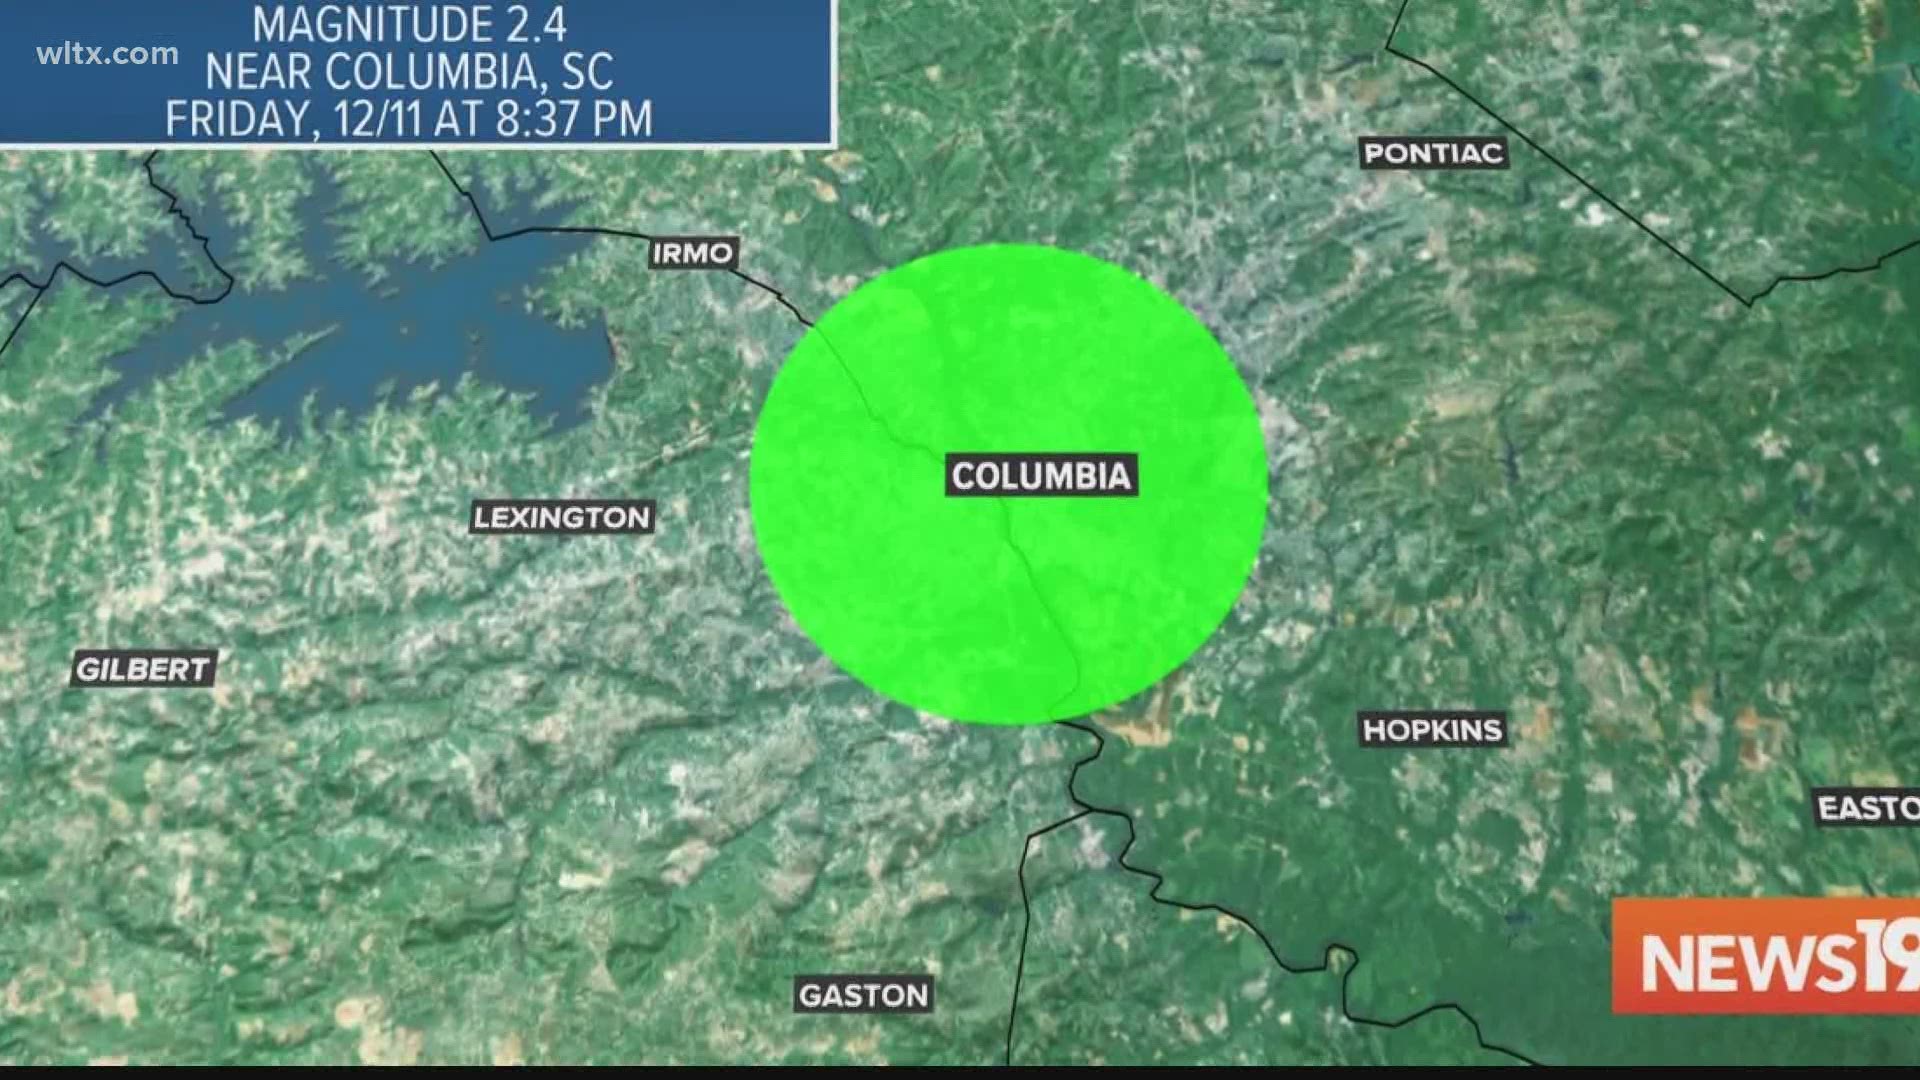 The United States Geological Survey (USGS) confirms a 2.4 magnitude earthquake occurred in the Midlands Friday night.